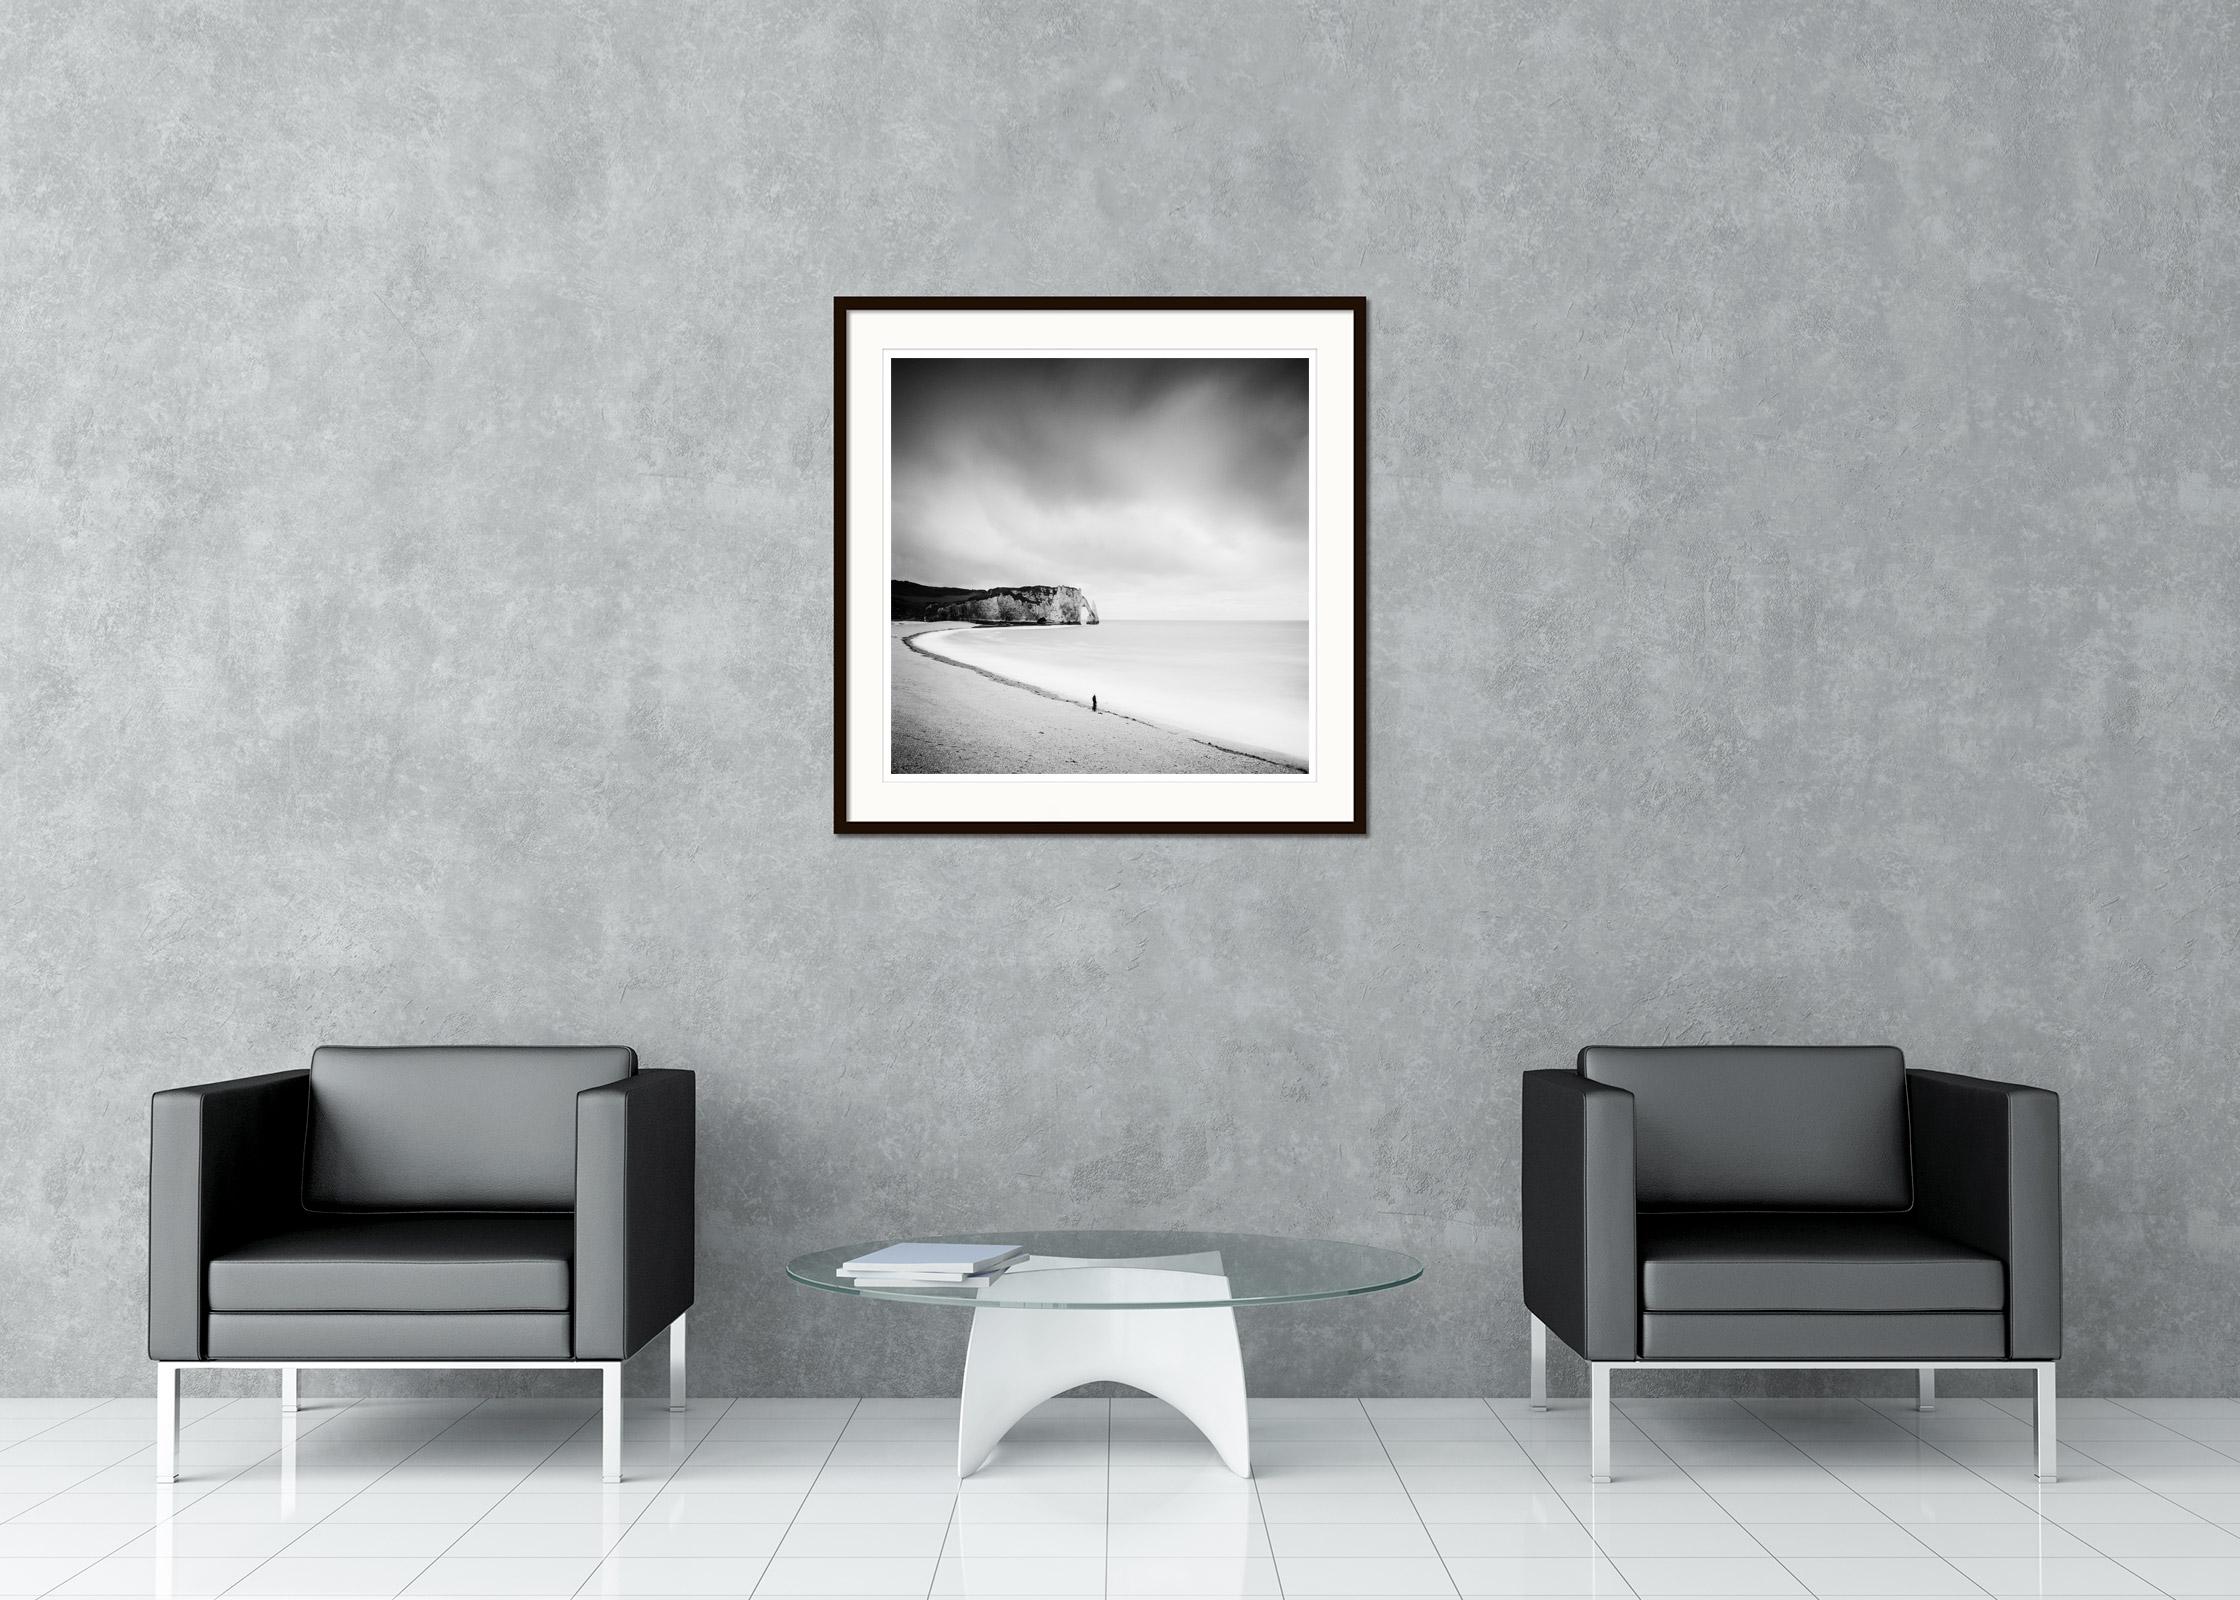 Black and white fine art landscape photography. Beautiful beach with fishermen and the impressive rock formation of Etretat, France.. Archival pigment ink print as part of a limited edition of 9. All Gerald Berghammer prints are made to order in